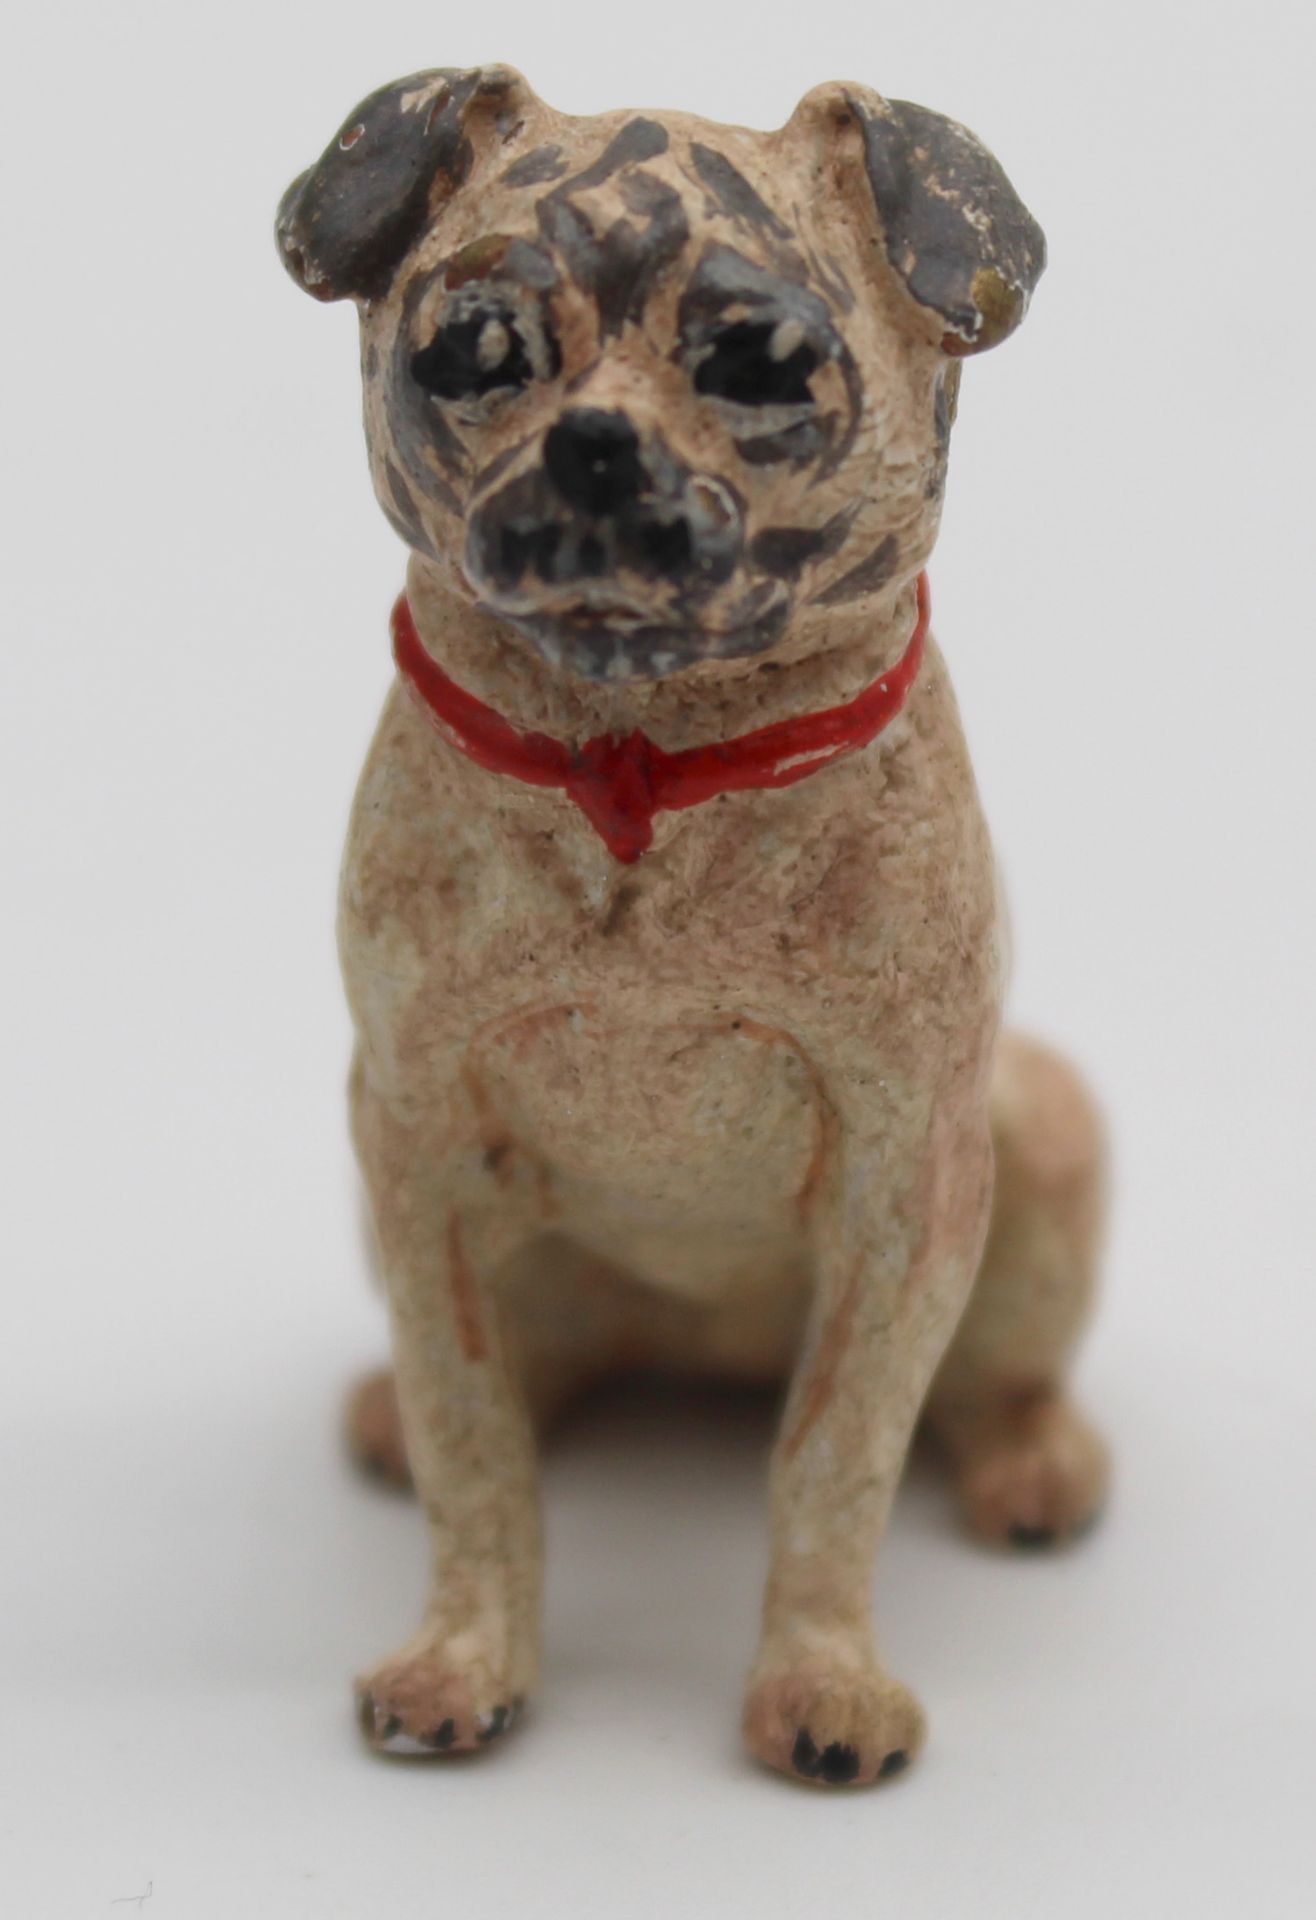 5 pugs. Cold painted bronze, Vienna? - Image 3 of 13